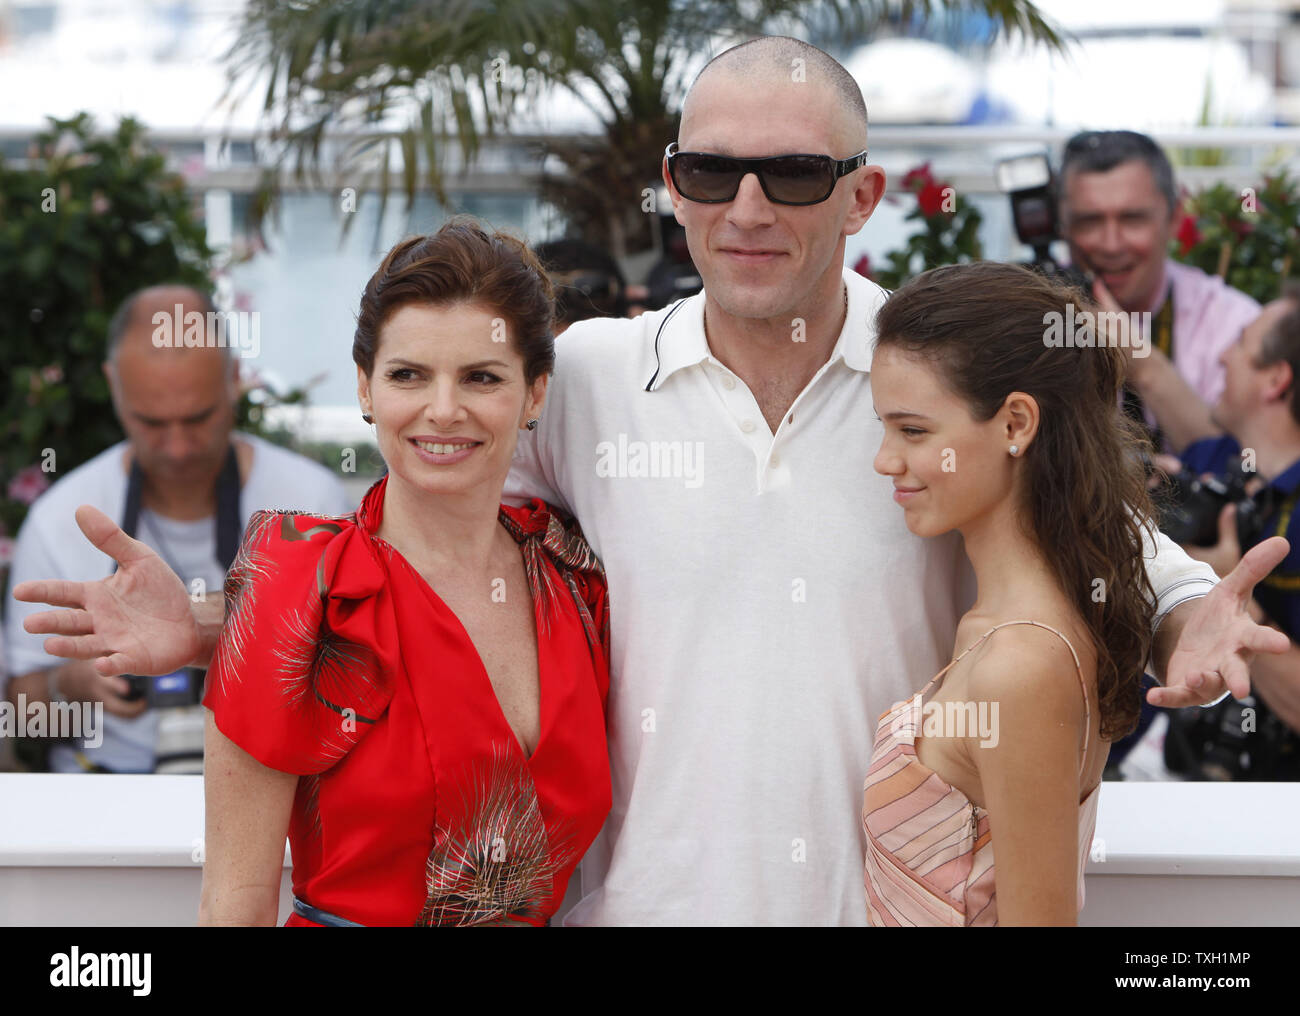 Actress Debora Bloch (L), actor Vincent Cassell (C) and actress Laura Neiva arrive at a photocall for the film 'A Deriva' at the 62nd annual Cannes Film Festival in Cannes, France on May 21, 2009.   (UPI Photo/David Silpa) Stock Photo